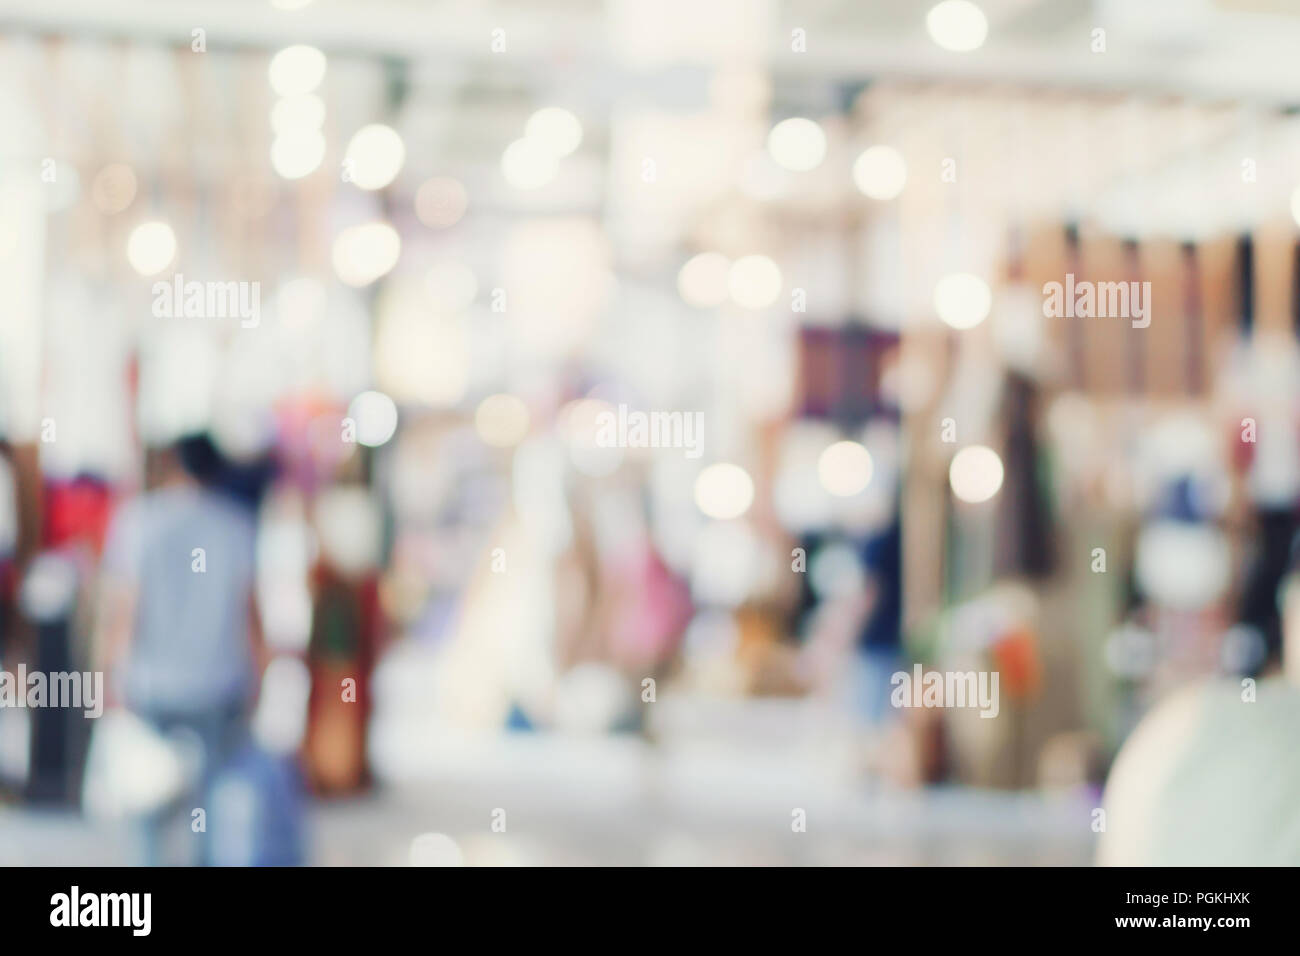 Abstract blurred image of department store use for abstract background Stock Photo